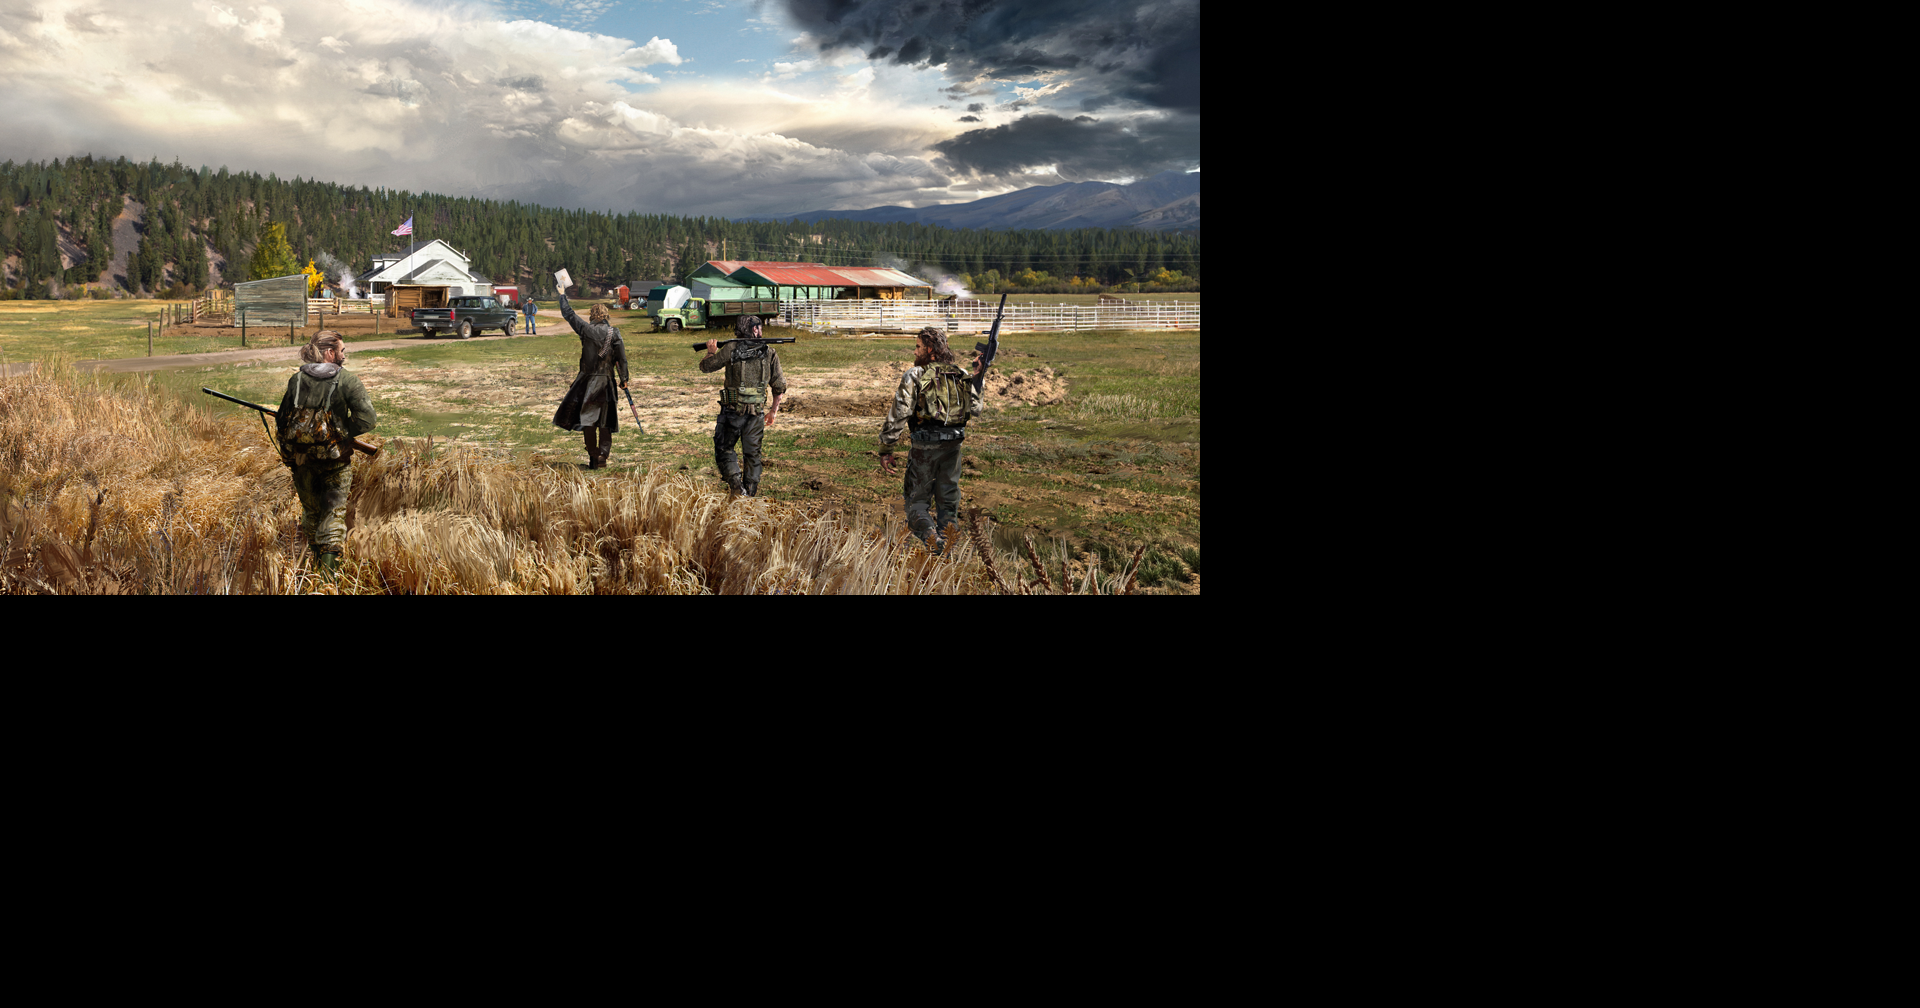 Far Cry 5 Lovingly Renders the Countryside of Montana, But Not Everyone is  Blissed Out